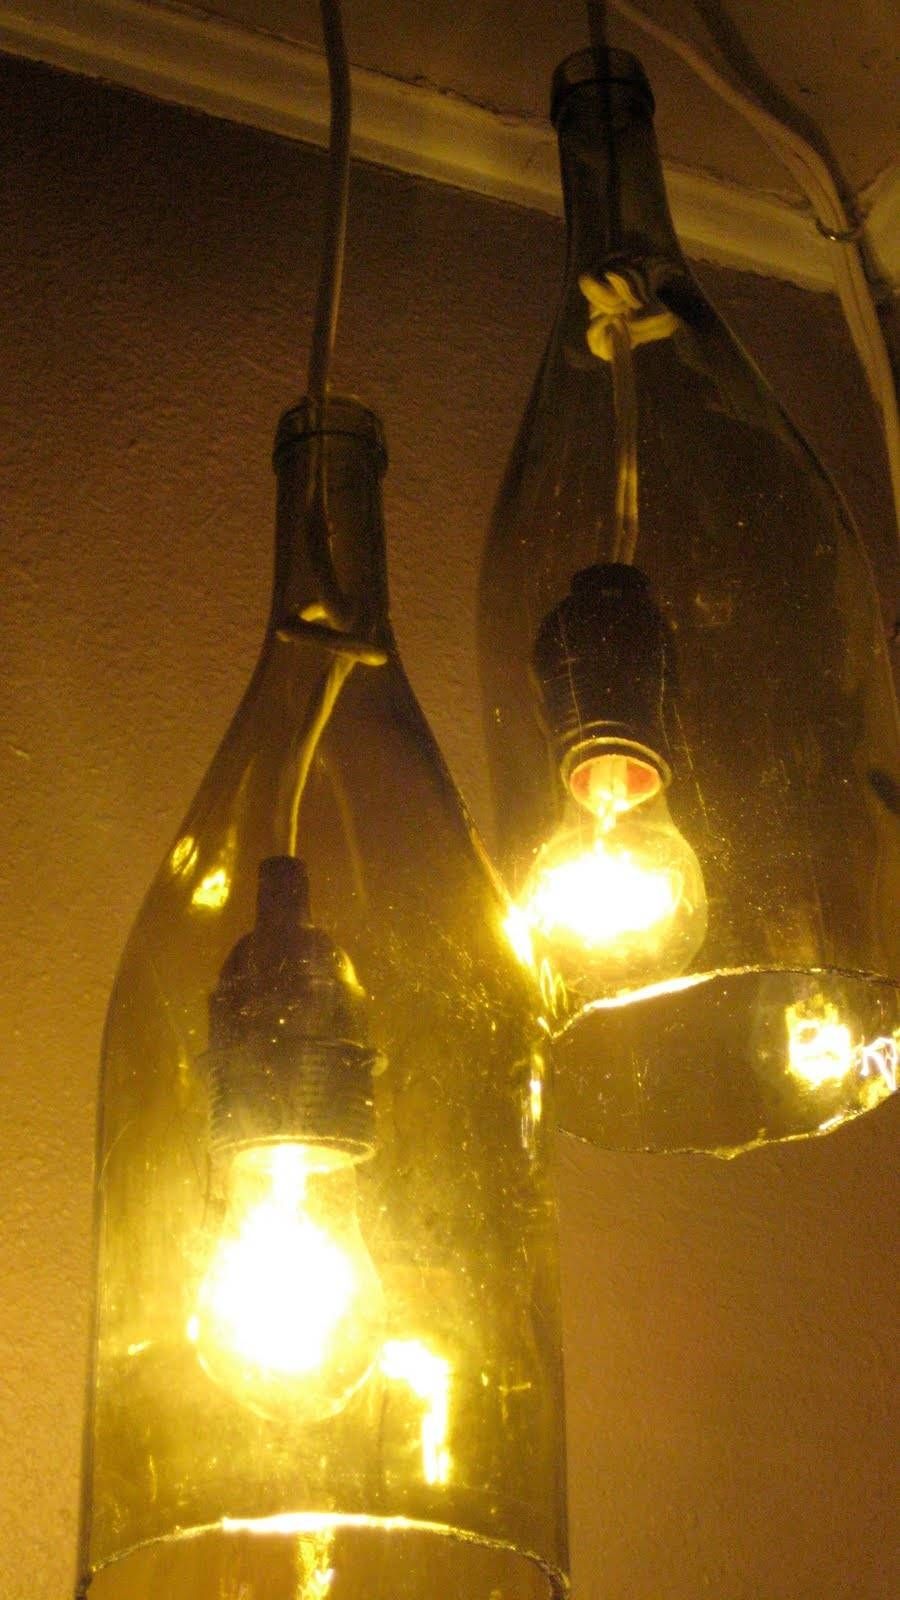 Remodelaholic | 14 Great Diy Pendant Lights And Link Party Throughout Wine Bottle Ceiling Lights (View 10 of 15)